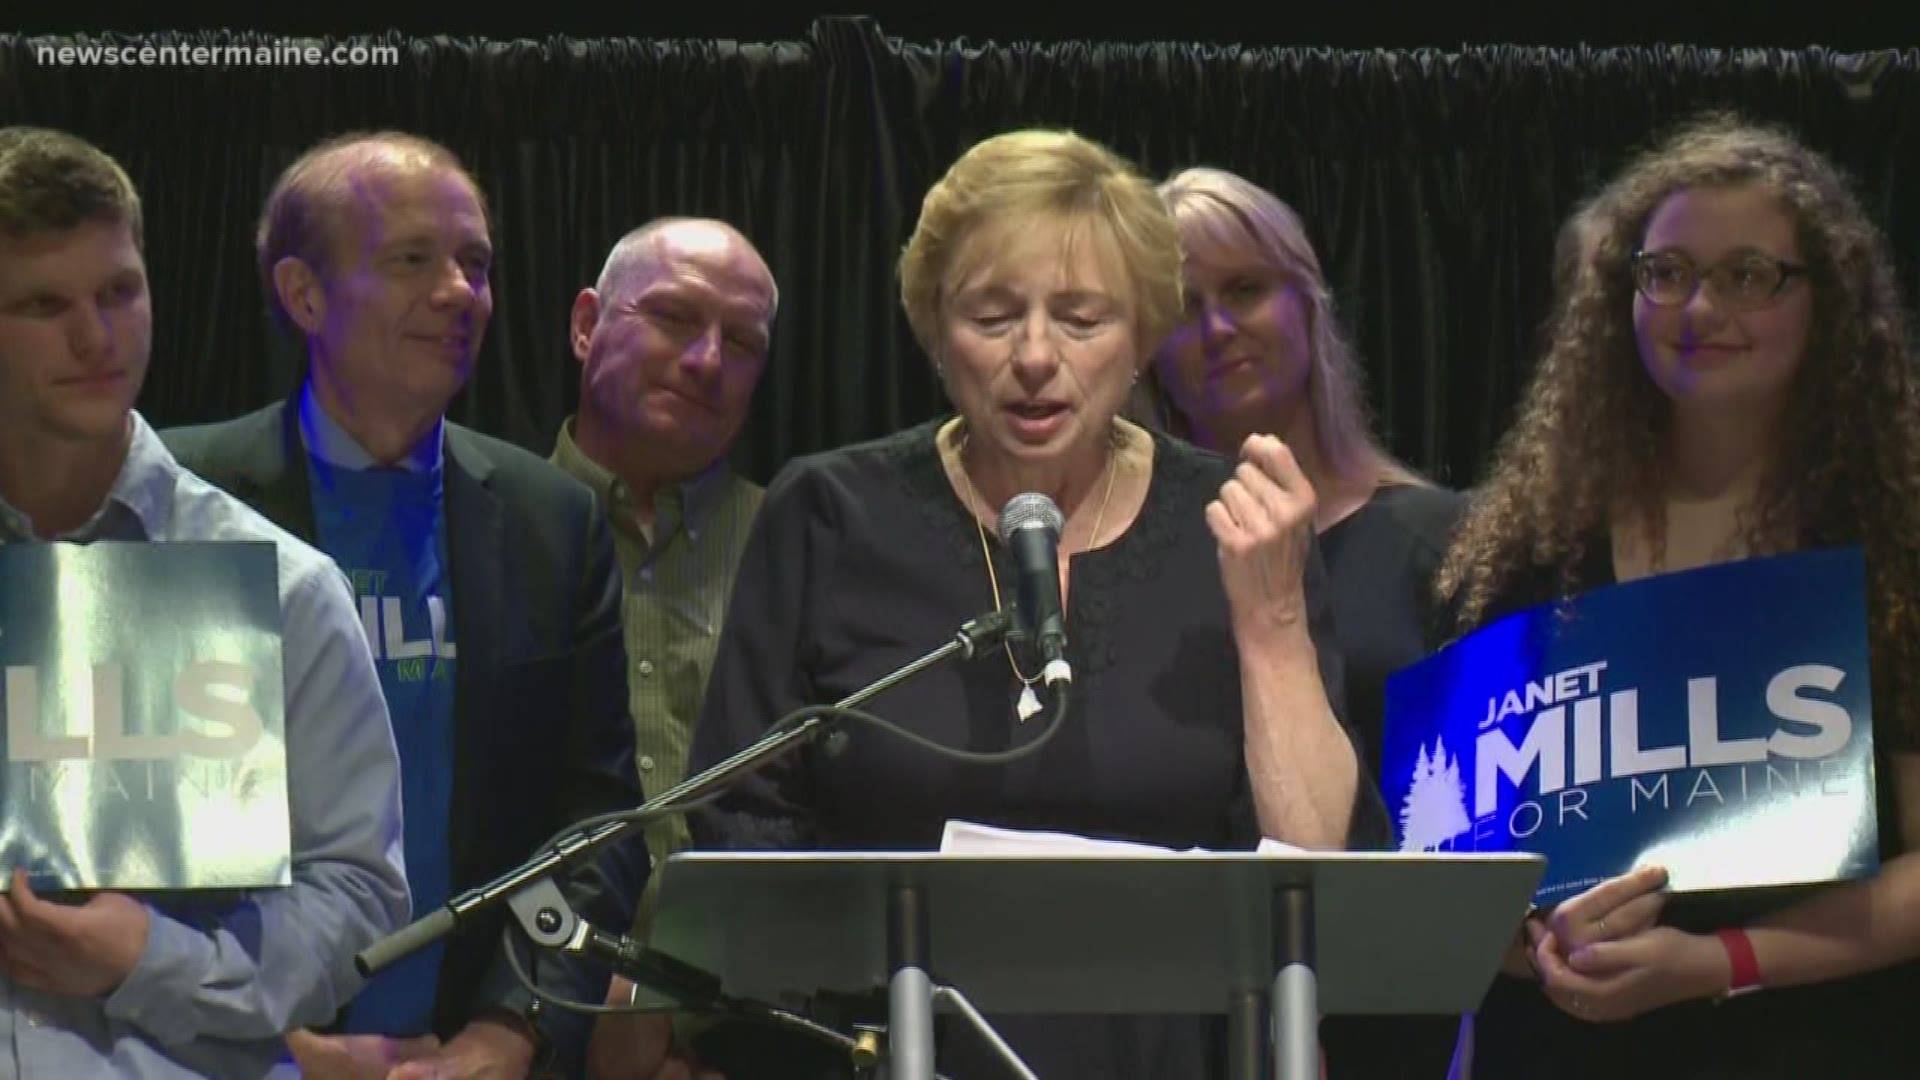 Mainers made history yesterday, electing Janet Mills to be our state's 75th Governor-- and the first woman to ever hold that job.